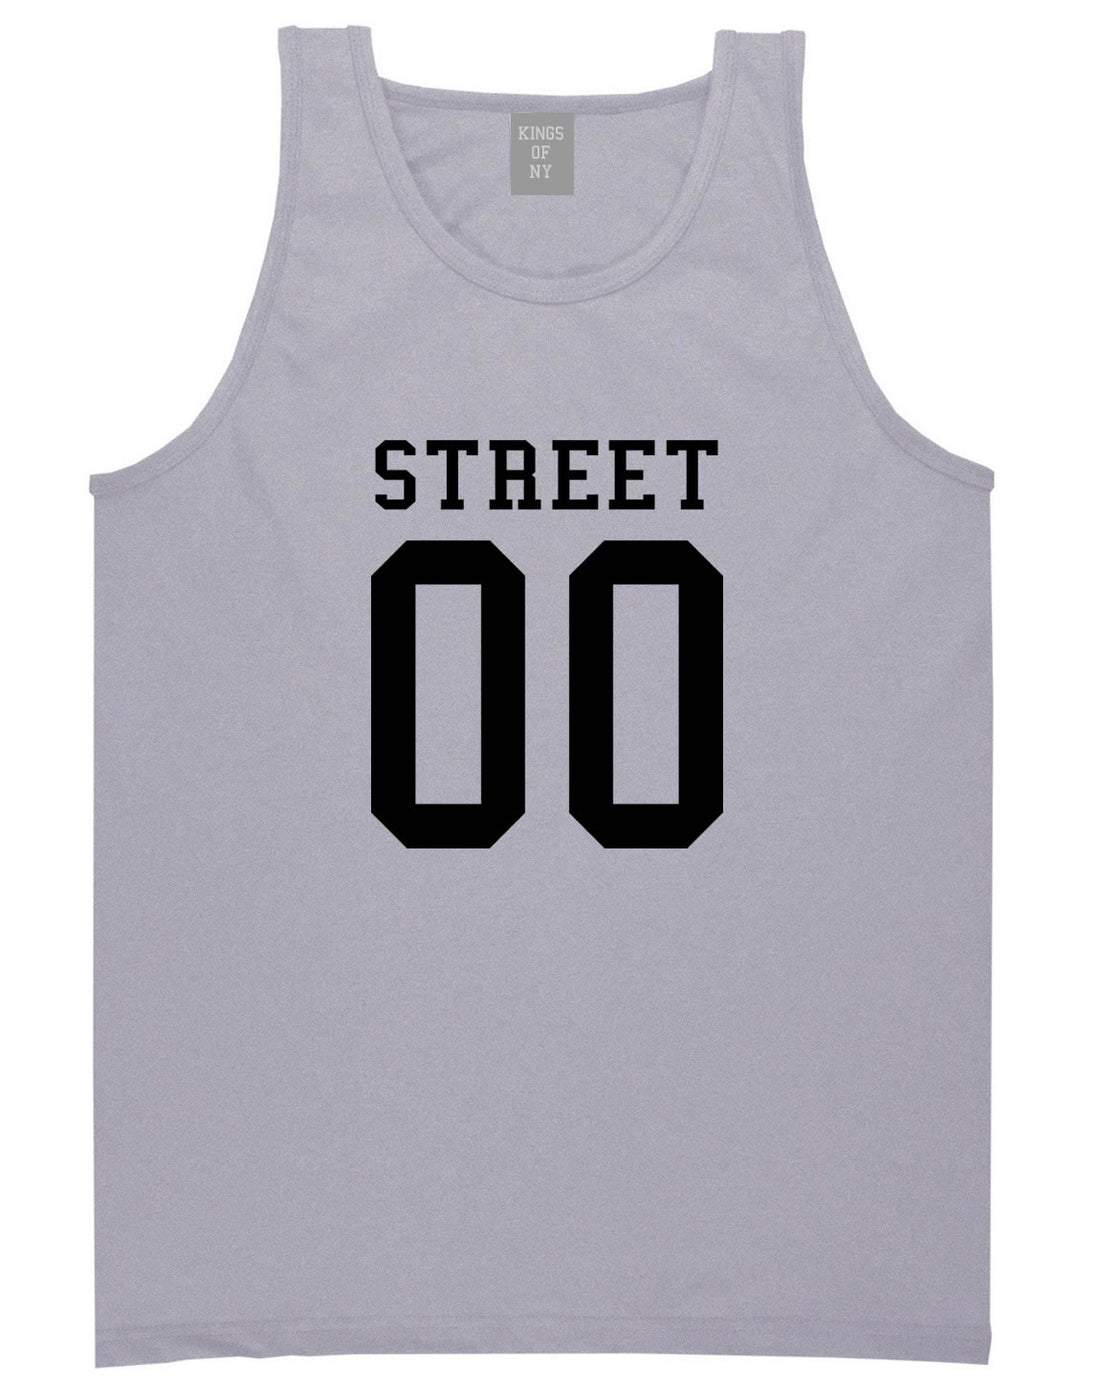 Street Team 00 Jersey Tank Top in Grey By Kings Of NY